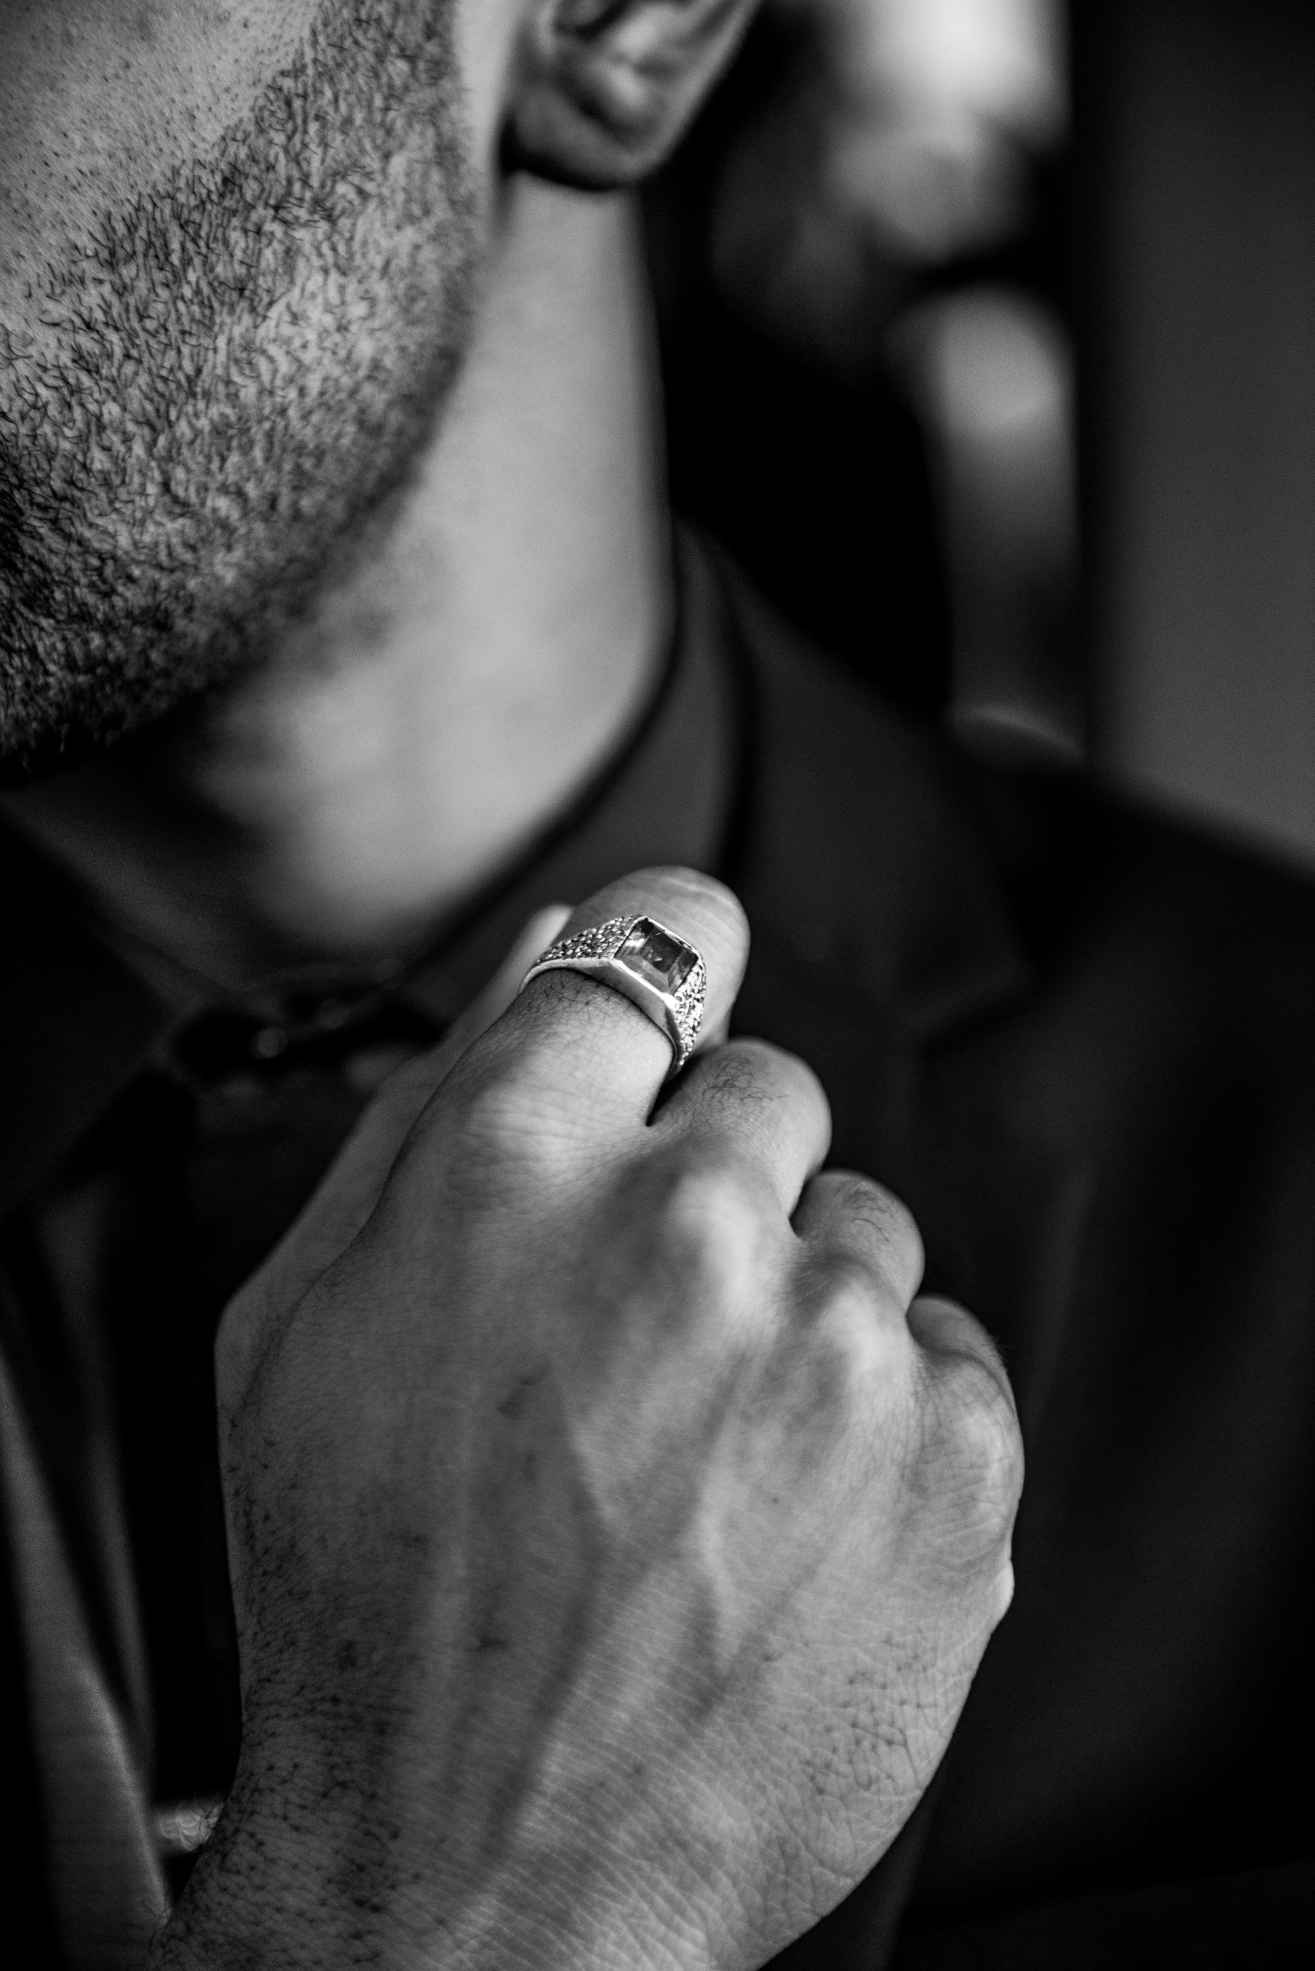 The man wears a ring on his finger